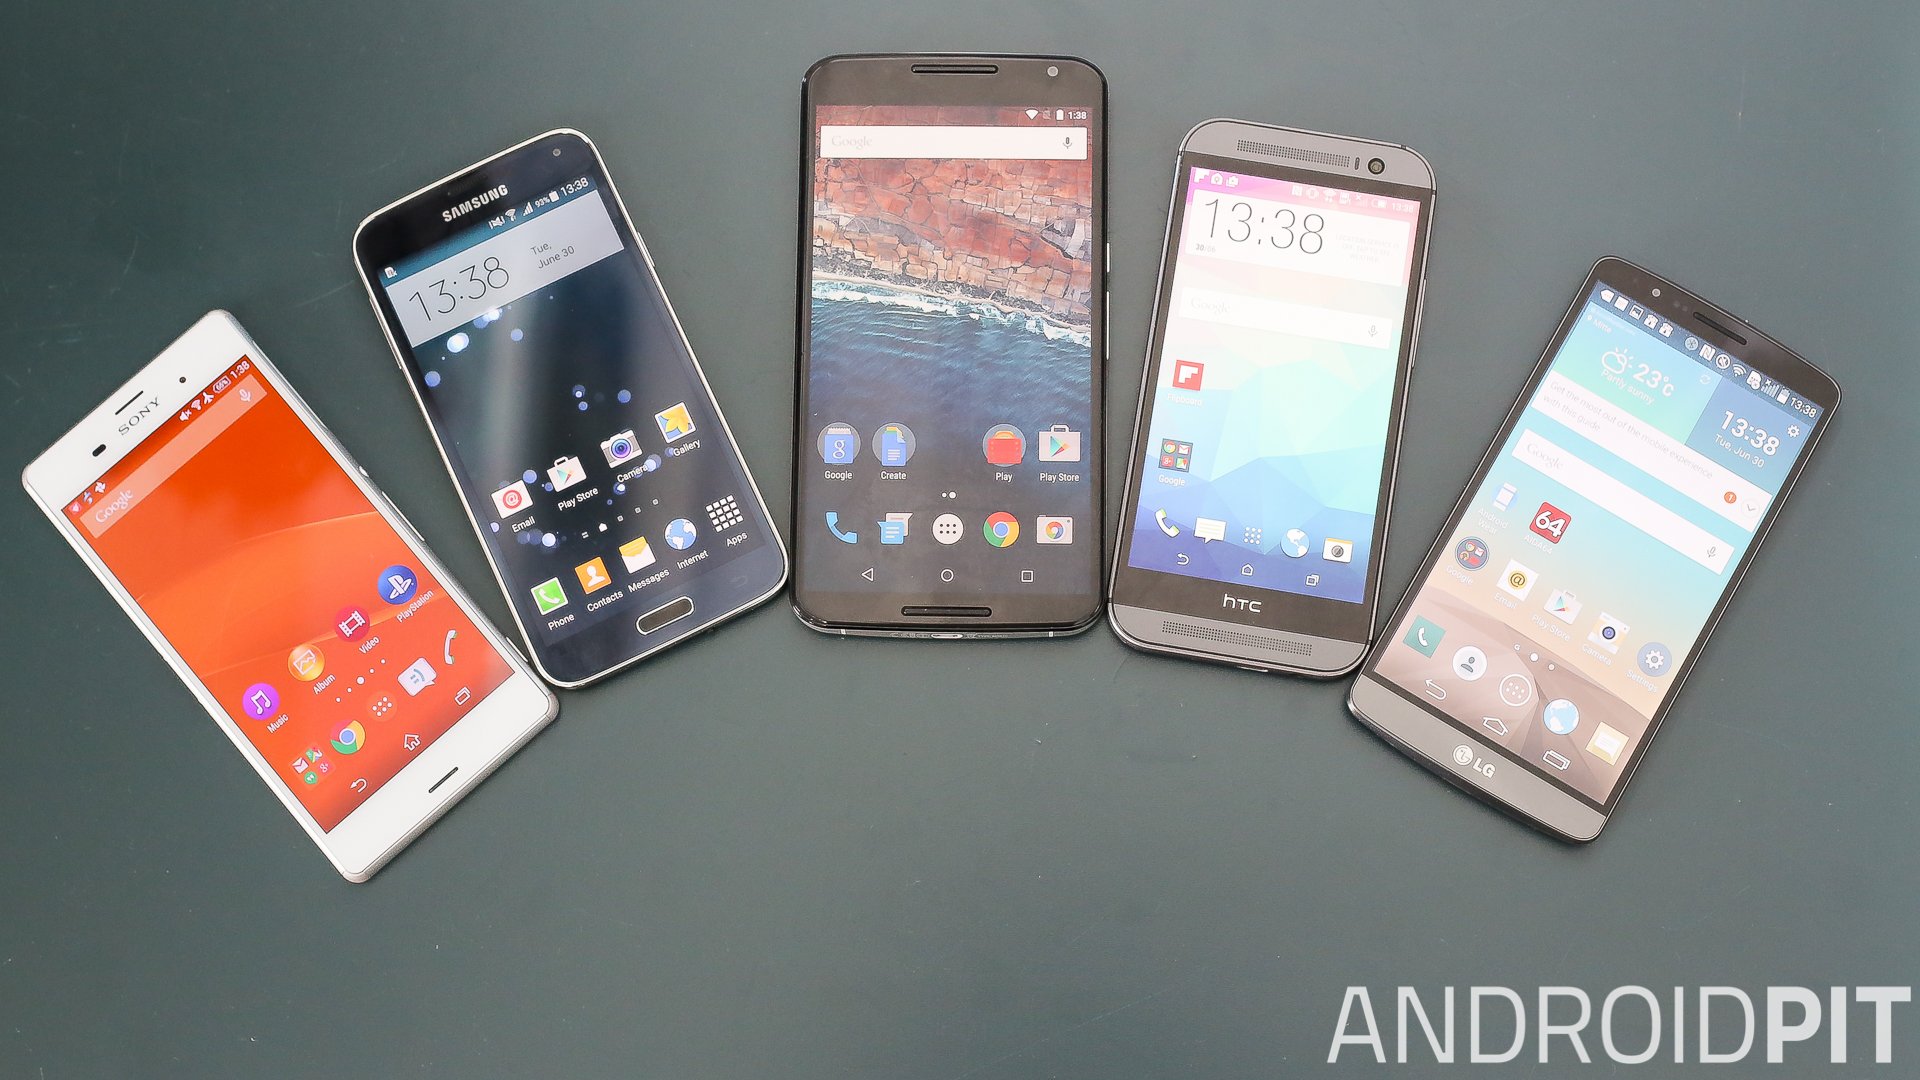 Galaxy S5, Xperia Z2, Moto Maxx, LG G3: how much do 2014 line tops cost today?